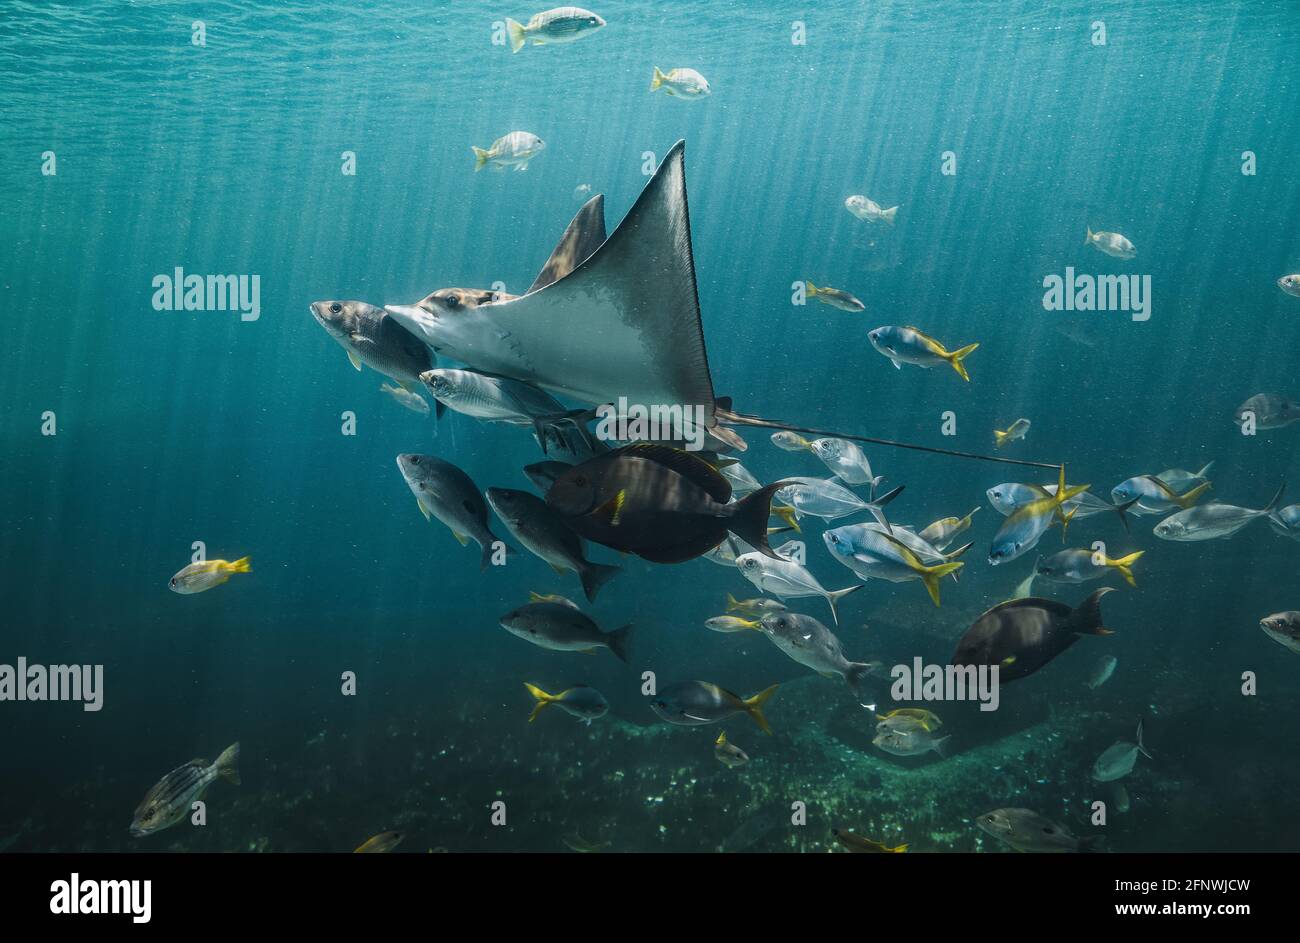 Live Eagle ray and small fishes group swimming in the aquarium tank with low lighting. Stock Photo